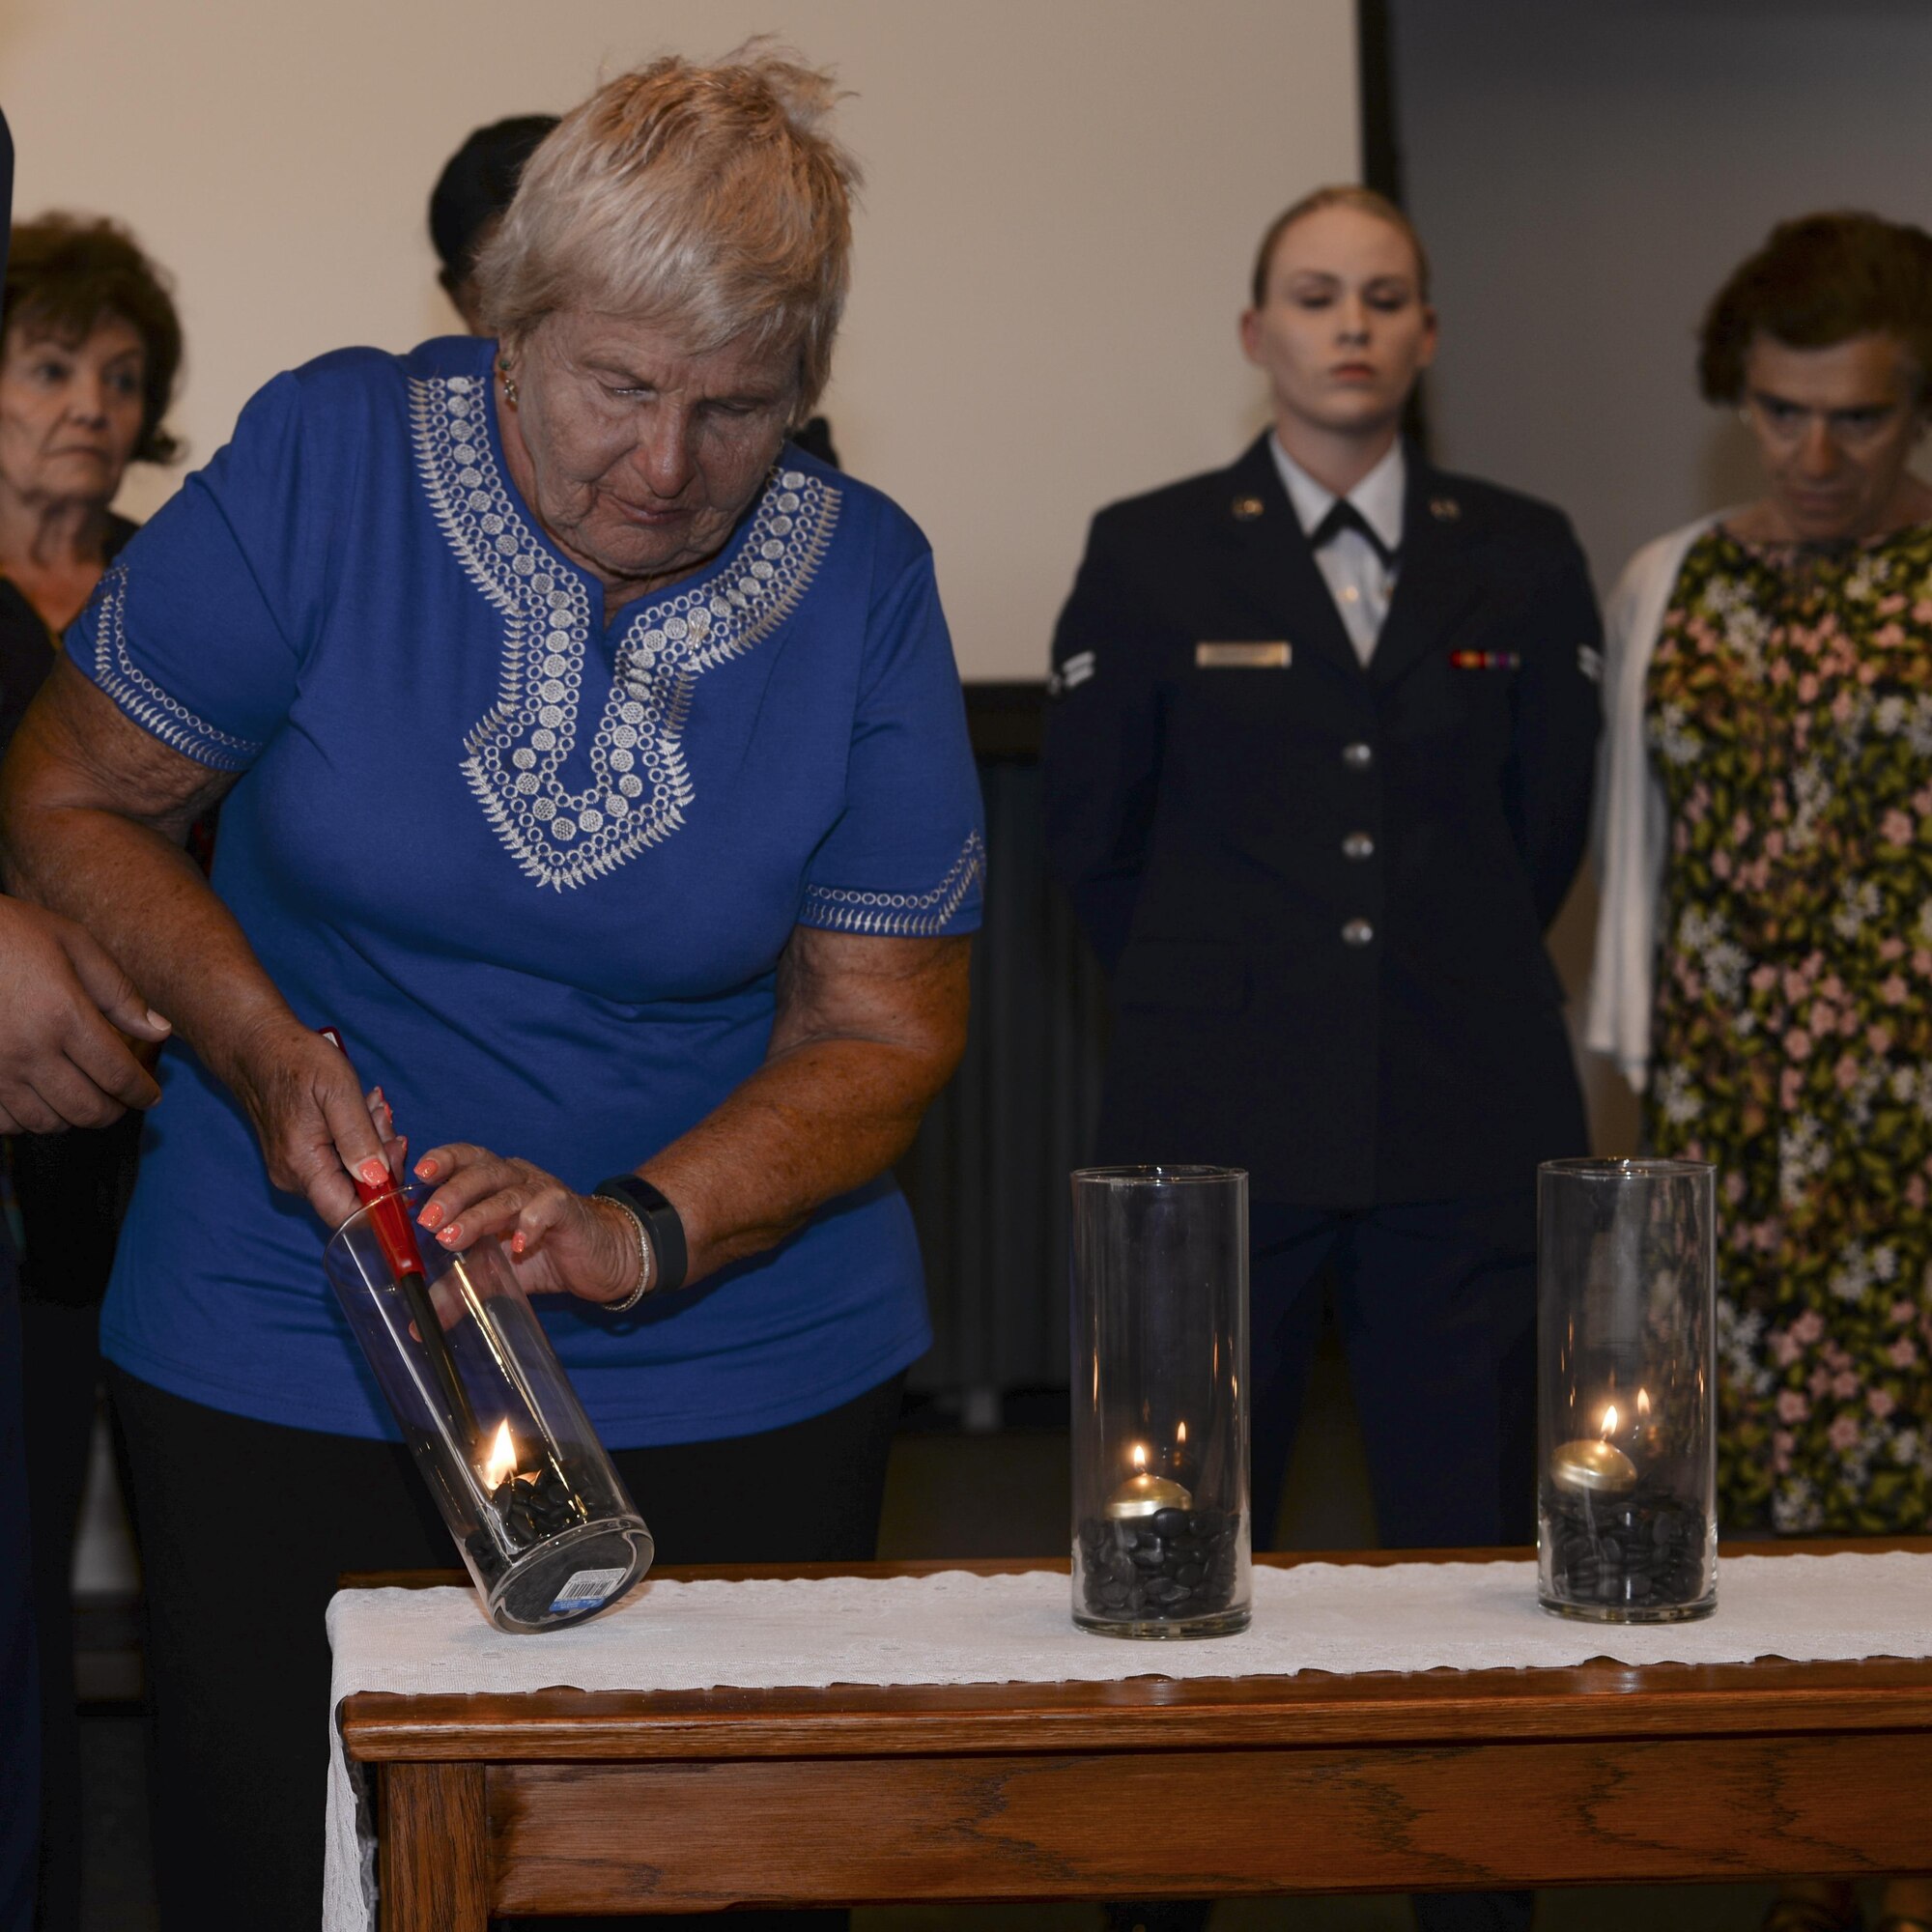 Wanda Wolosky, Holocaust survivor, lights a candle during a Holocaust remembrance ceremony at Davis-Monthan Air Force Base, Ariz., April 24, 2017. The ceremony was held to honor the 6 million Jews and millions of others that lost their lives during the Holocaust. (U.S. Air Force photo by Airman 1st Class Giovanni Sims)